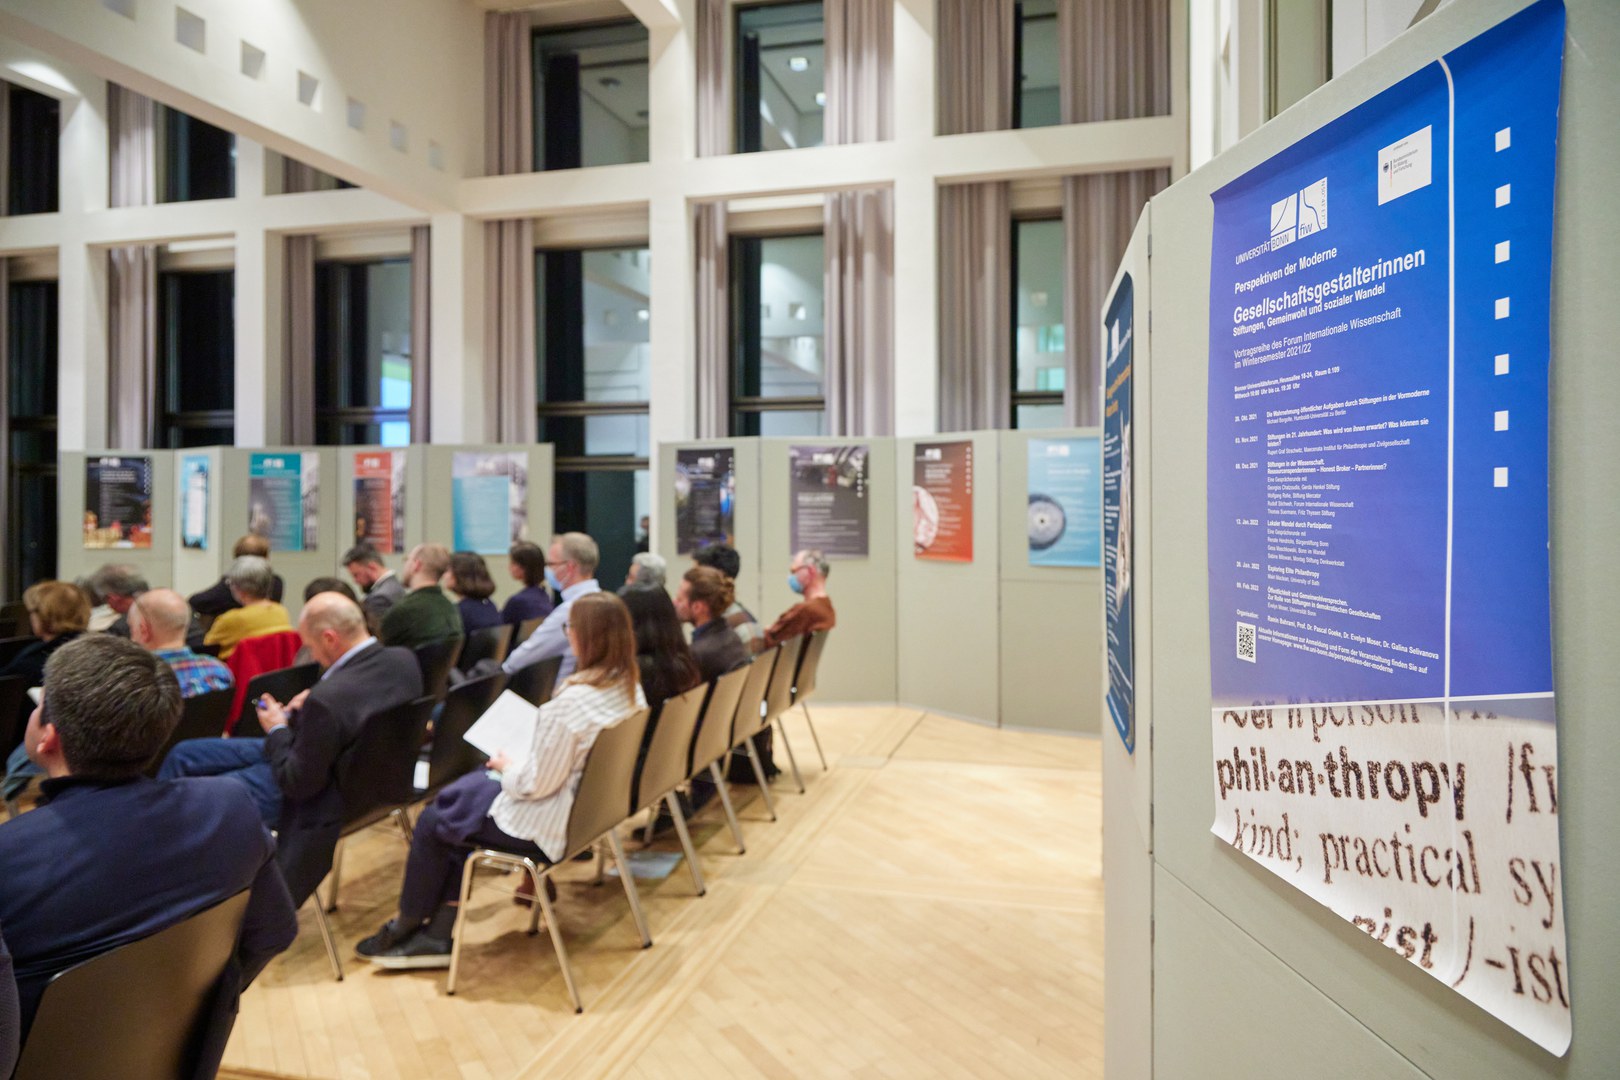 As part of the celebration, there was a poster exhibition on current research topics.